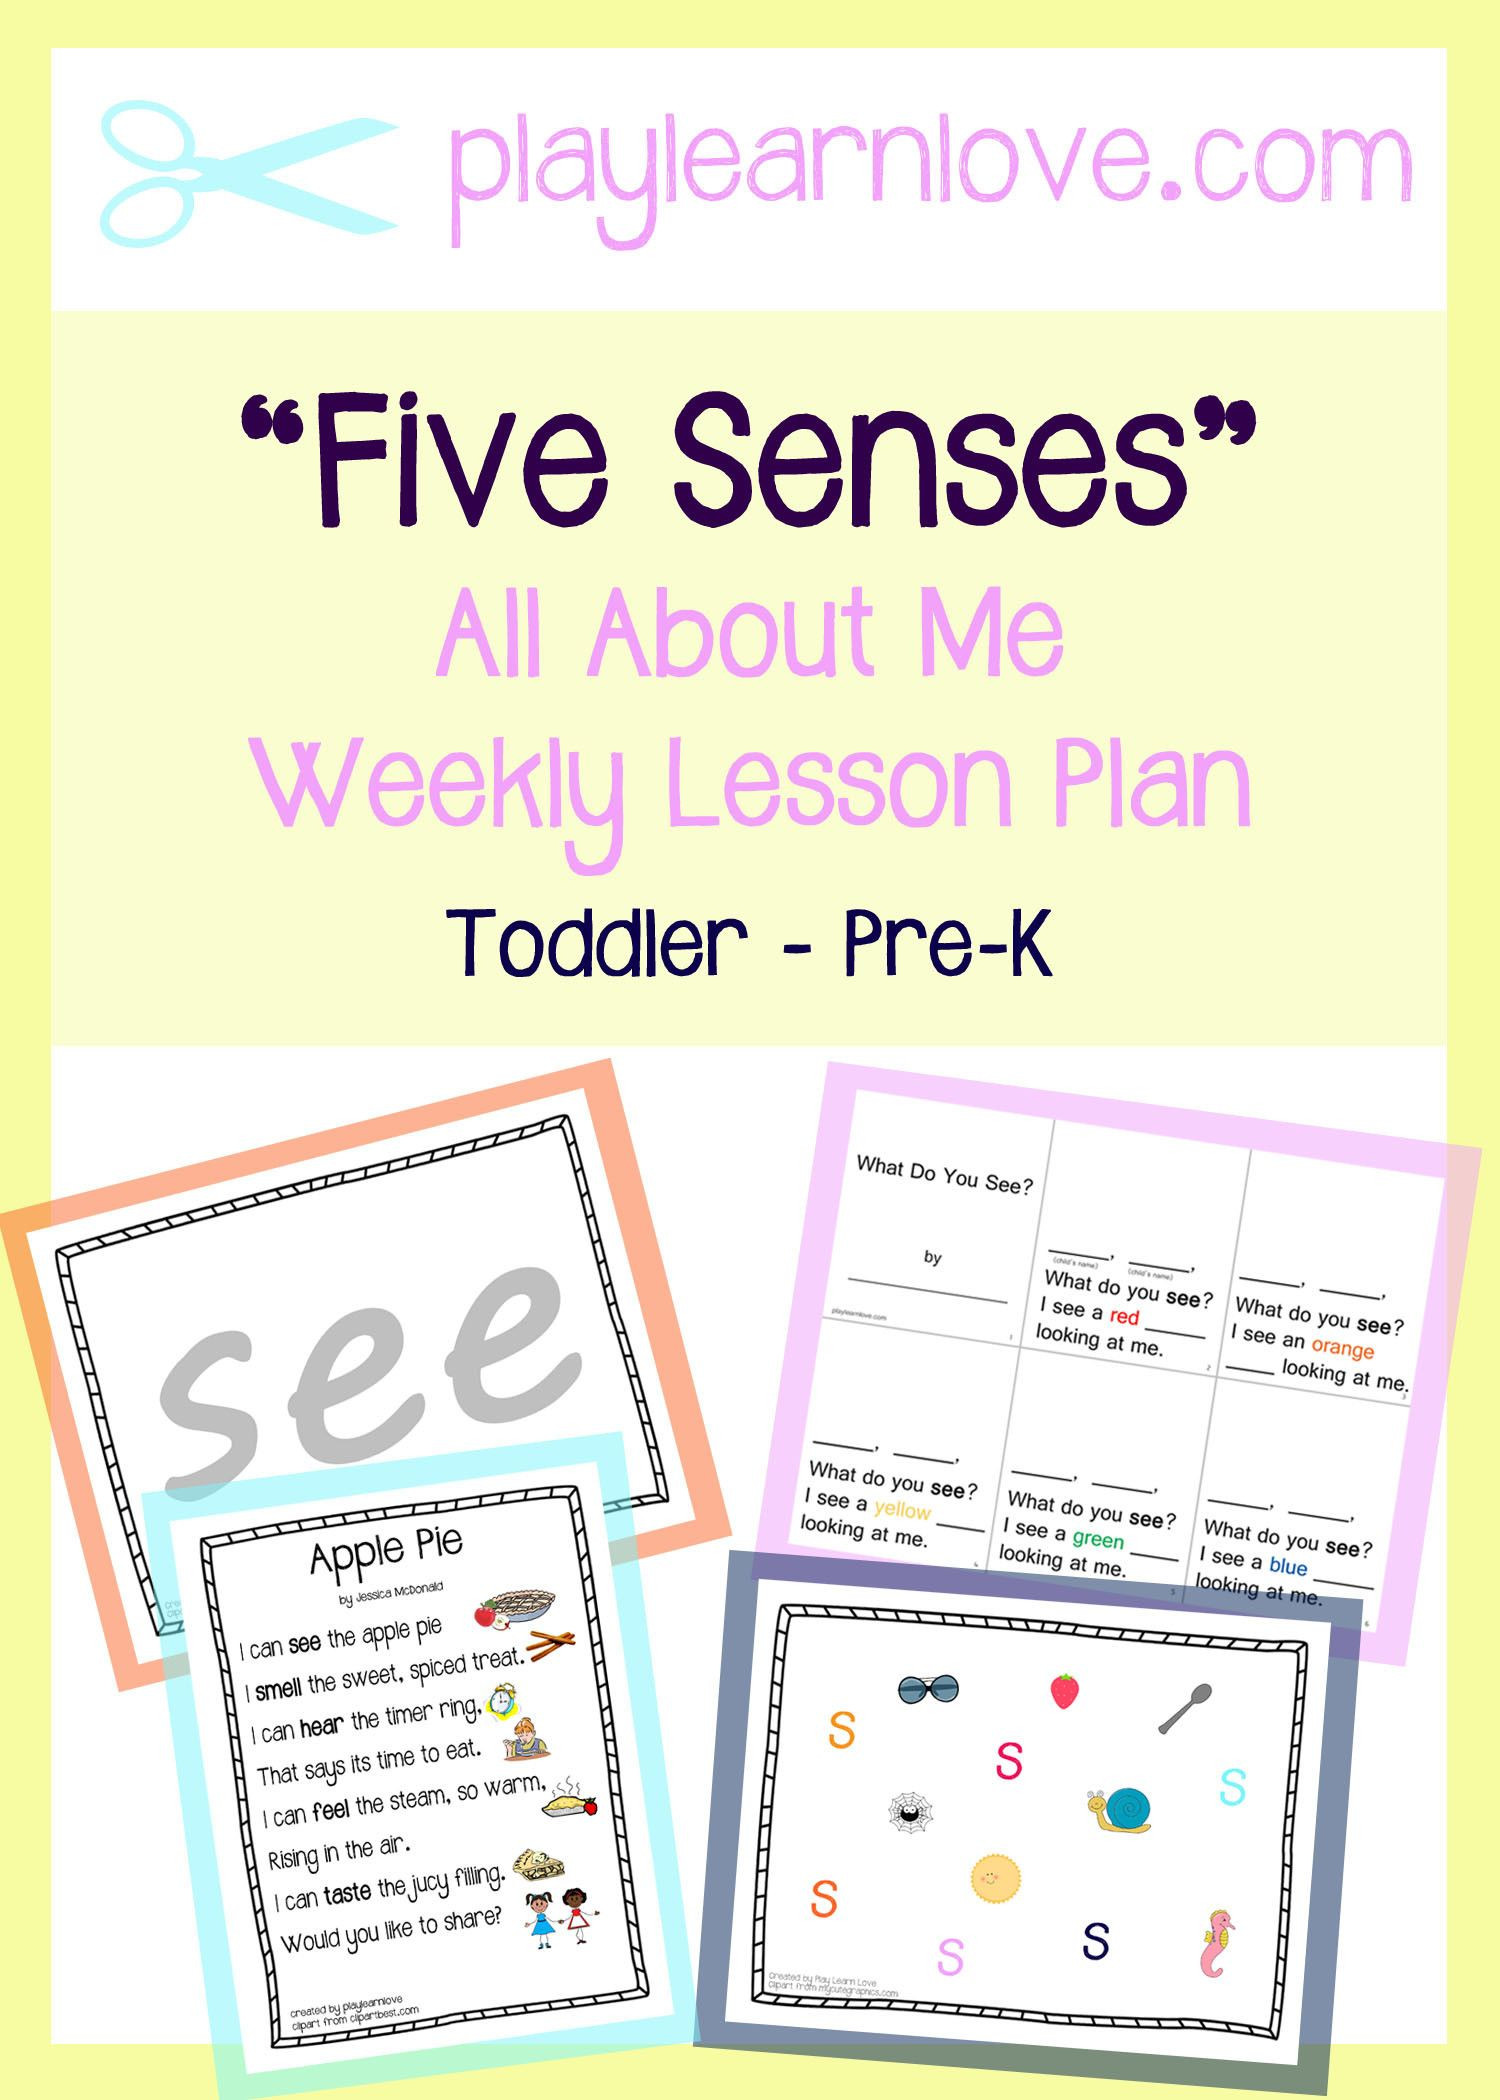 Five Senses Lesson Plan Five Senses Lesson Plan Preschool and toddler All